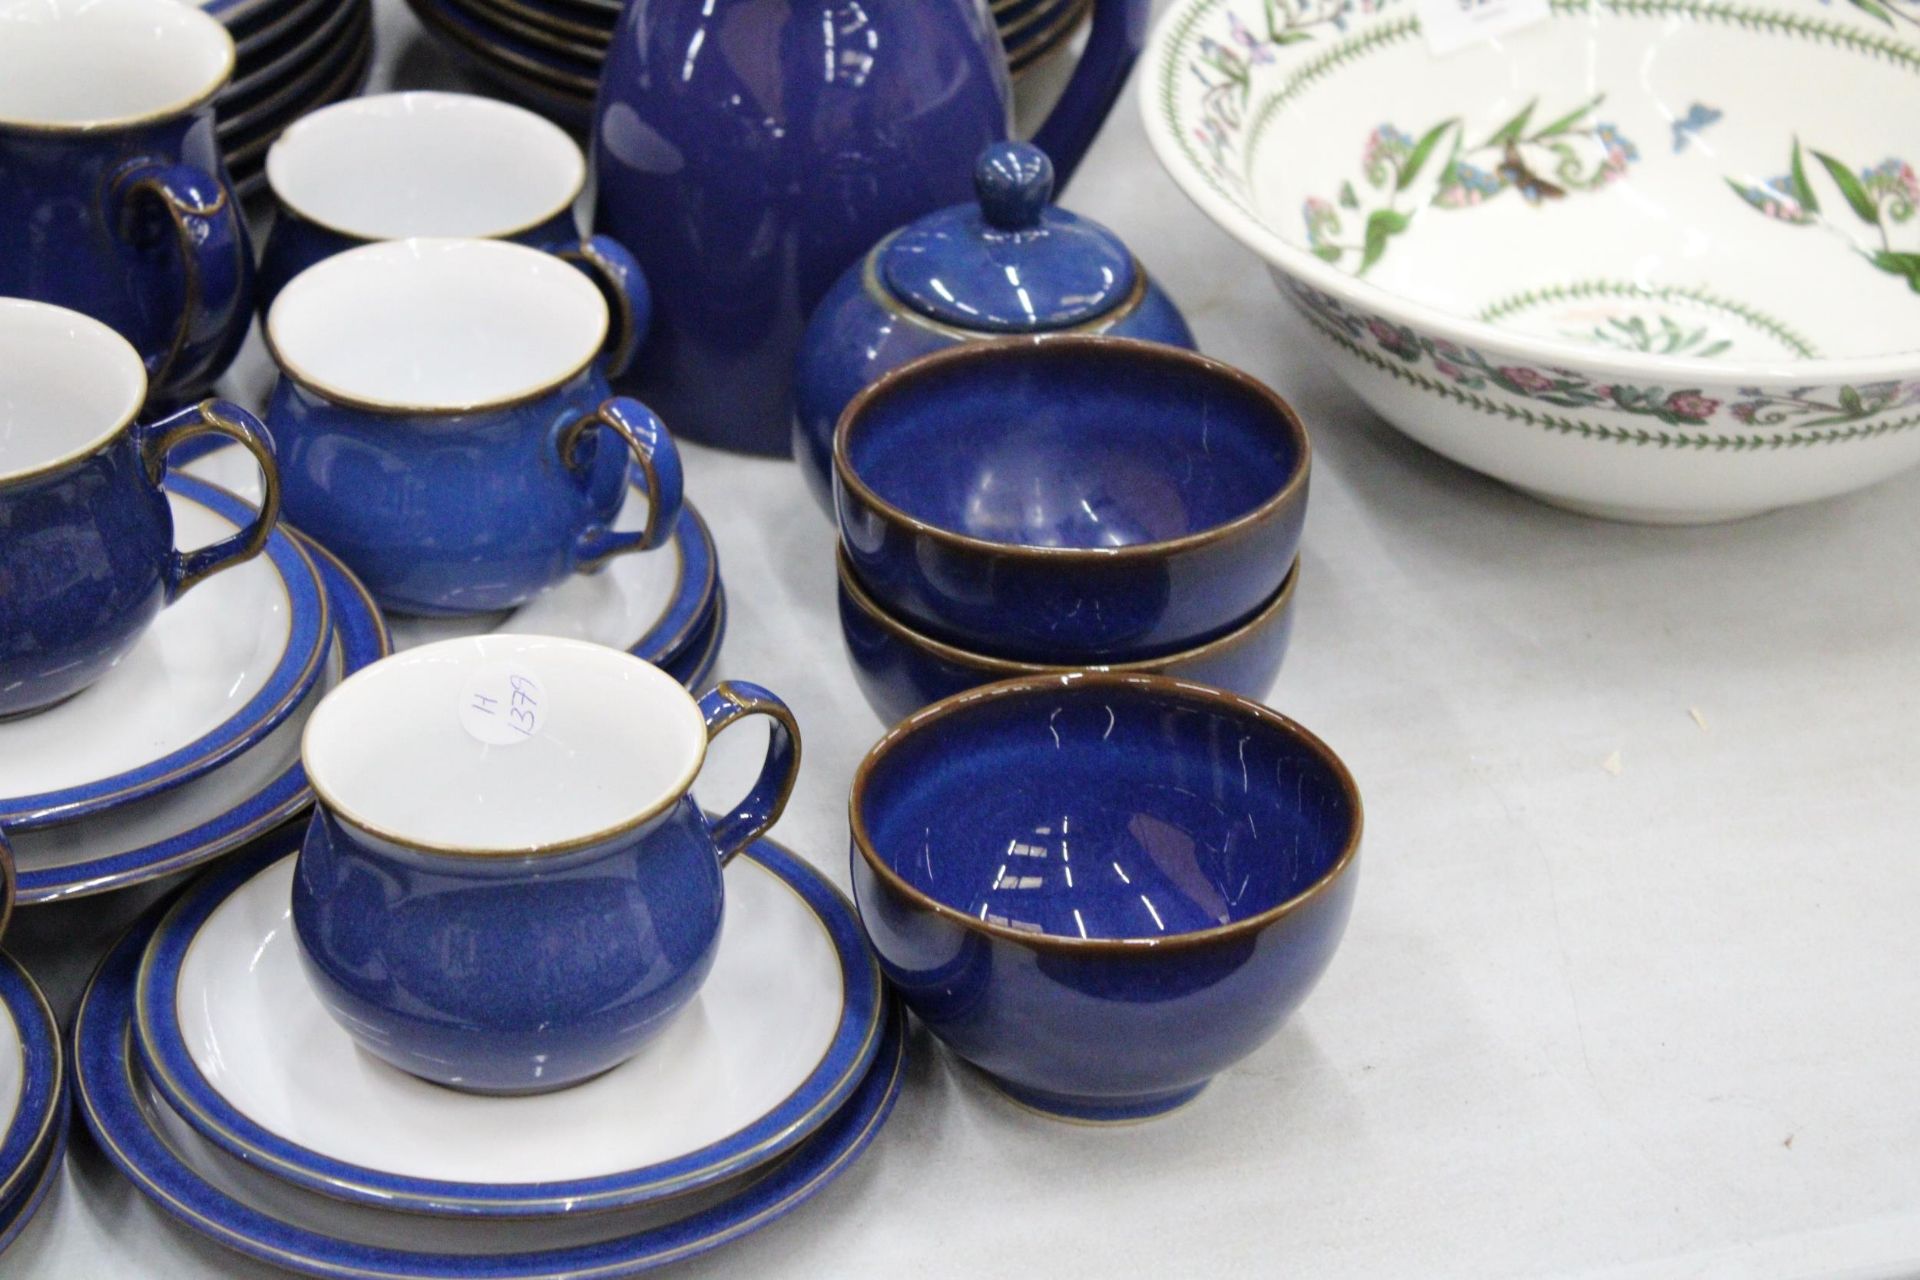 A DENBY COBALT BLUE DINNER SERVICE TO INCLUDE VARIOUS SIZES OF PLATES, BOWLS, A LARGE JUG, SUGAR - Image 3 of 5